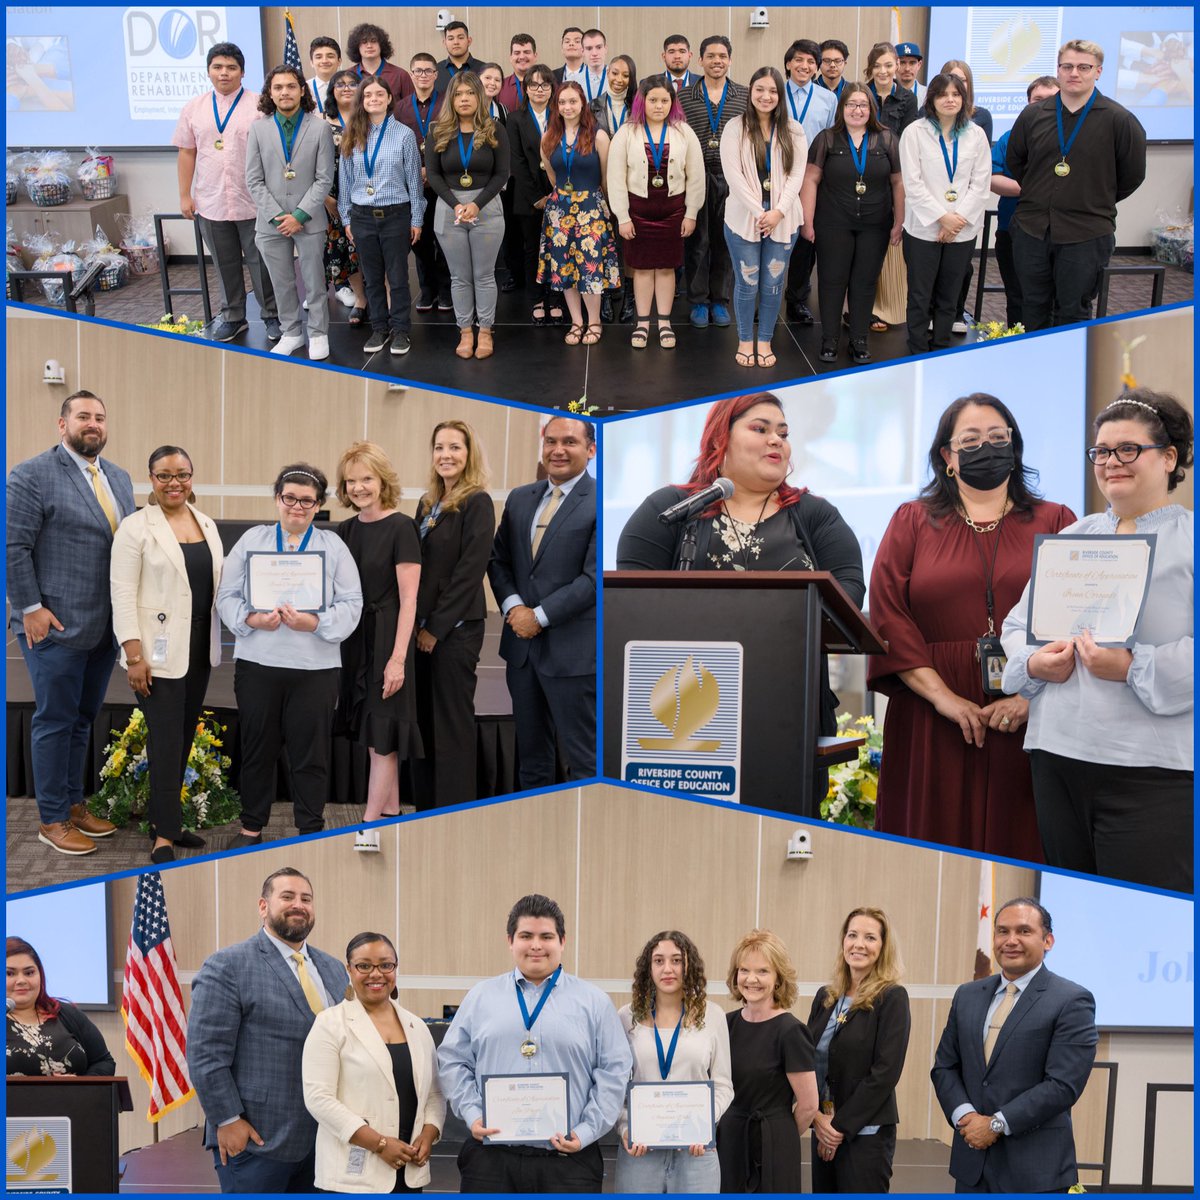 This morning @RCOE SPS held their annual Transition Partnership Program (TPP) Student Achievement Awards. The ceremony was moving & rewarding to see the positive impact that TPP has on the lives of these students, as they transitioning from high school to #HigherEd or employment.